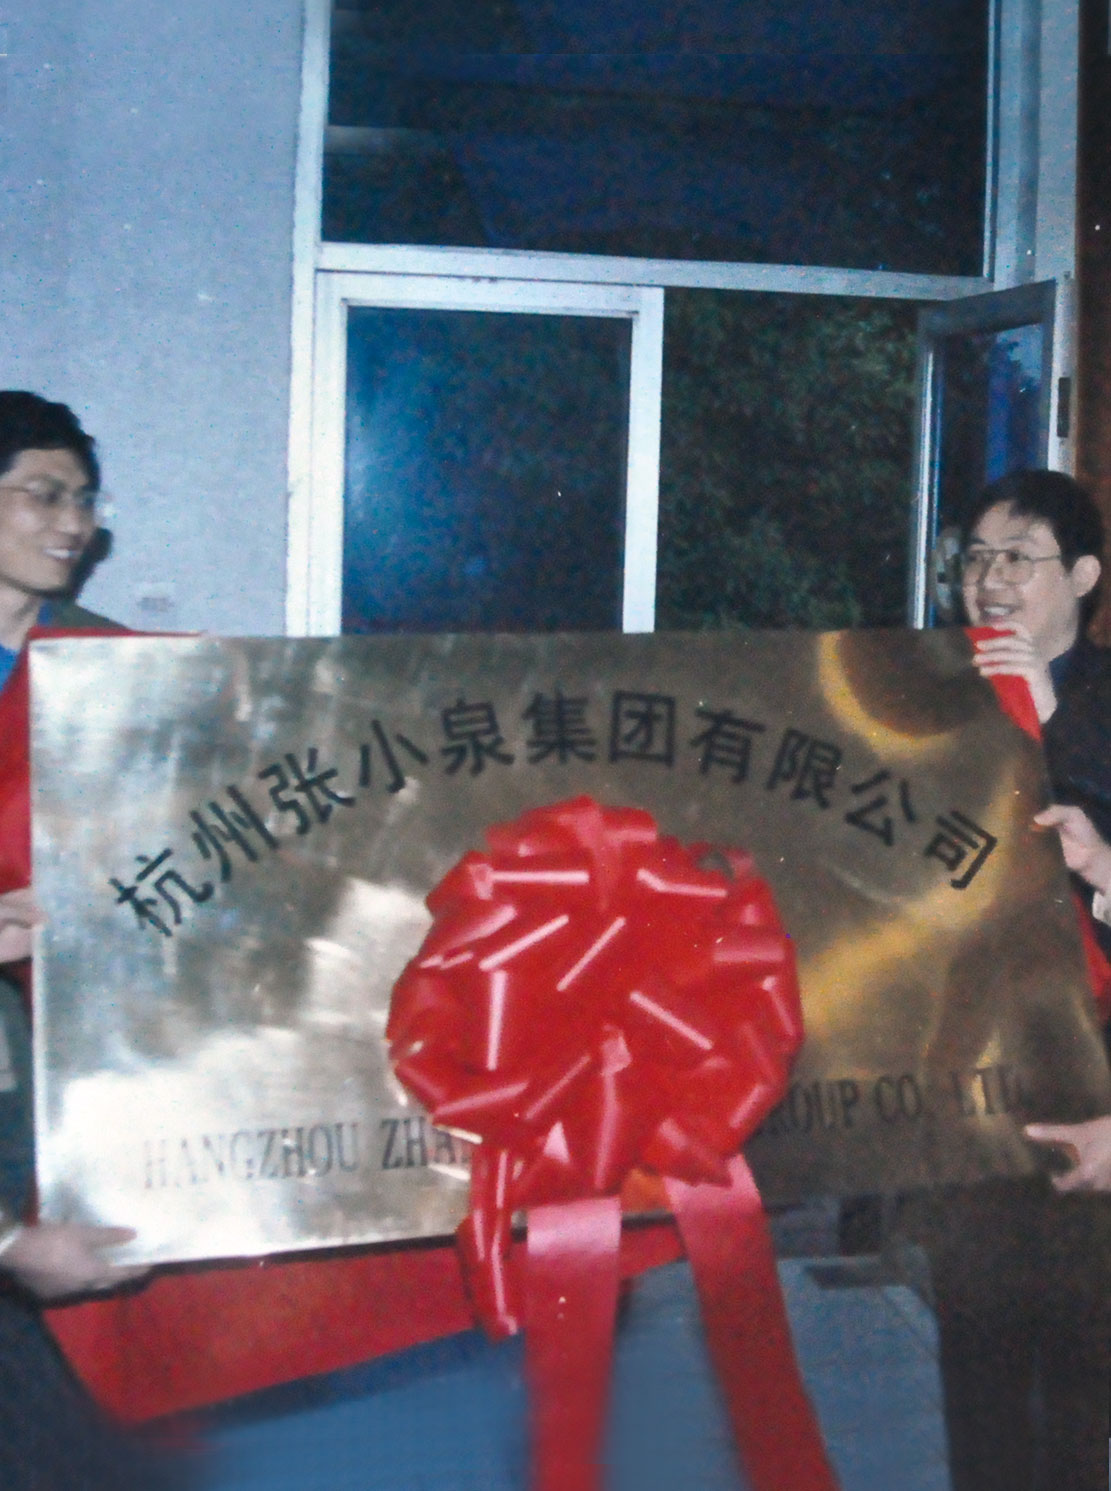 On December 29, 2000, "Zhang Xiaoquan" was resolutely transferred as an entirety, and boldly took a key step in transferring from a state-owned enterprise into a limited liability company with diversified investment entities.